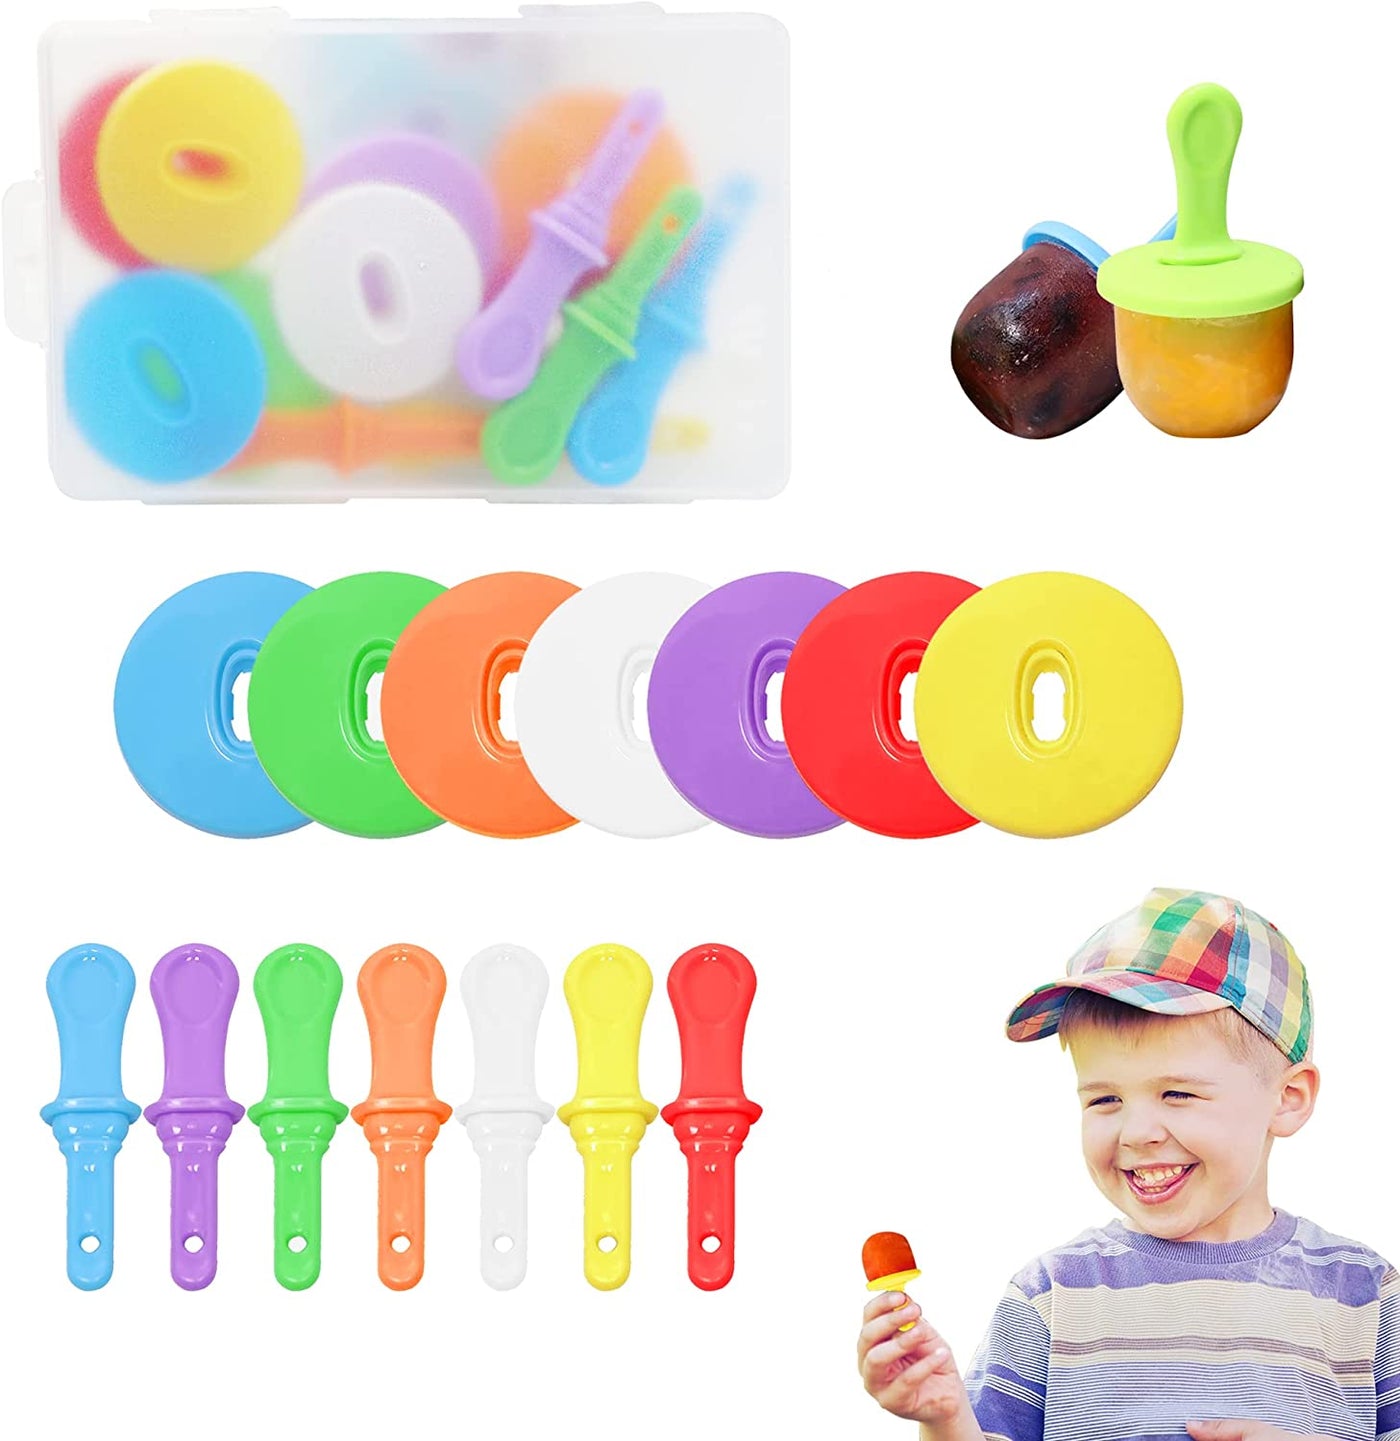  Holders for Kids Drip Free Ice Cream Sticks for Ice Pop Molds Colorful Craft Stick (7 PCS)